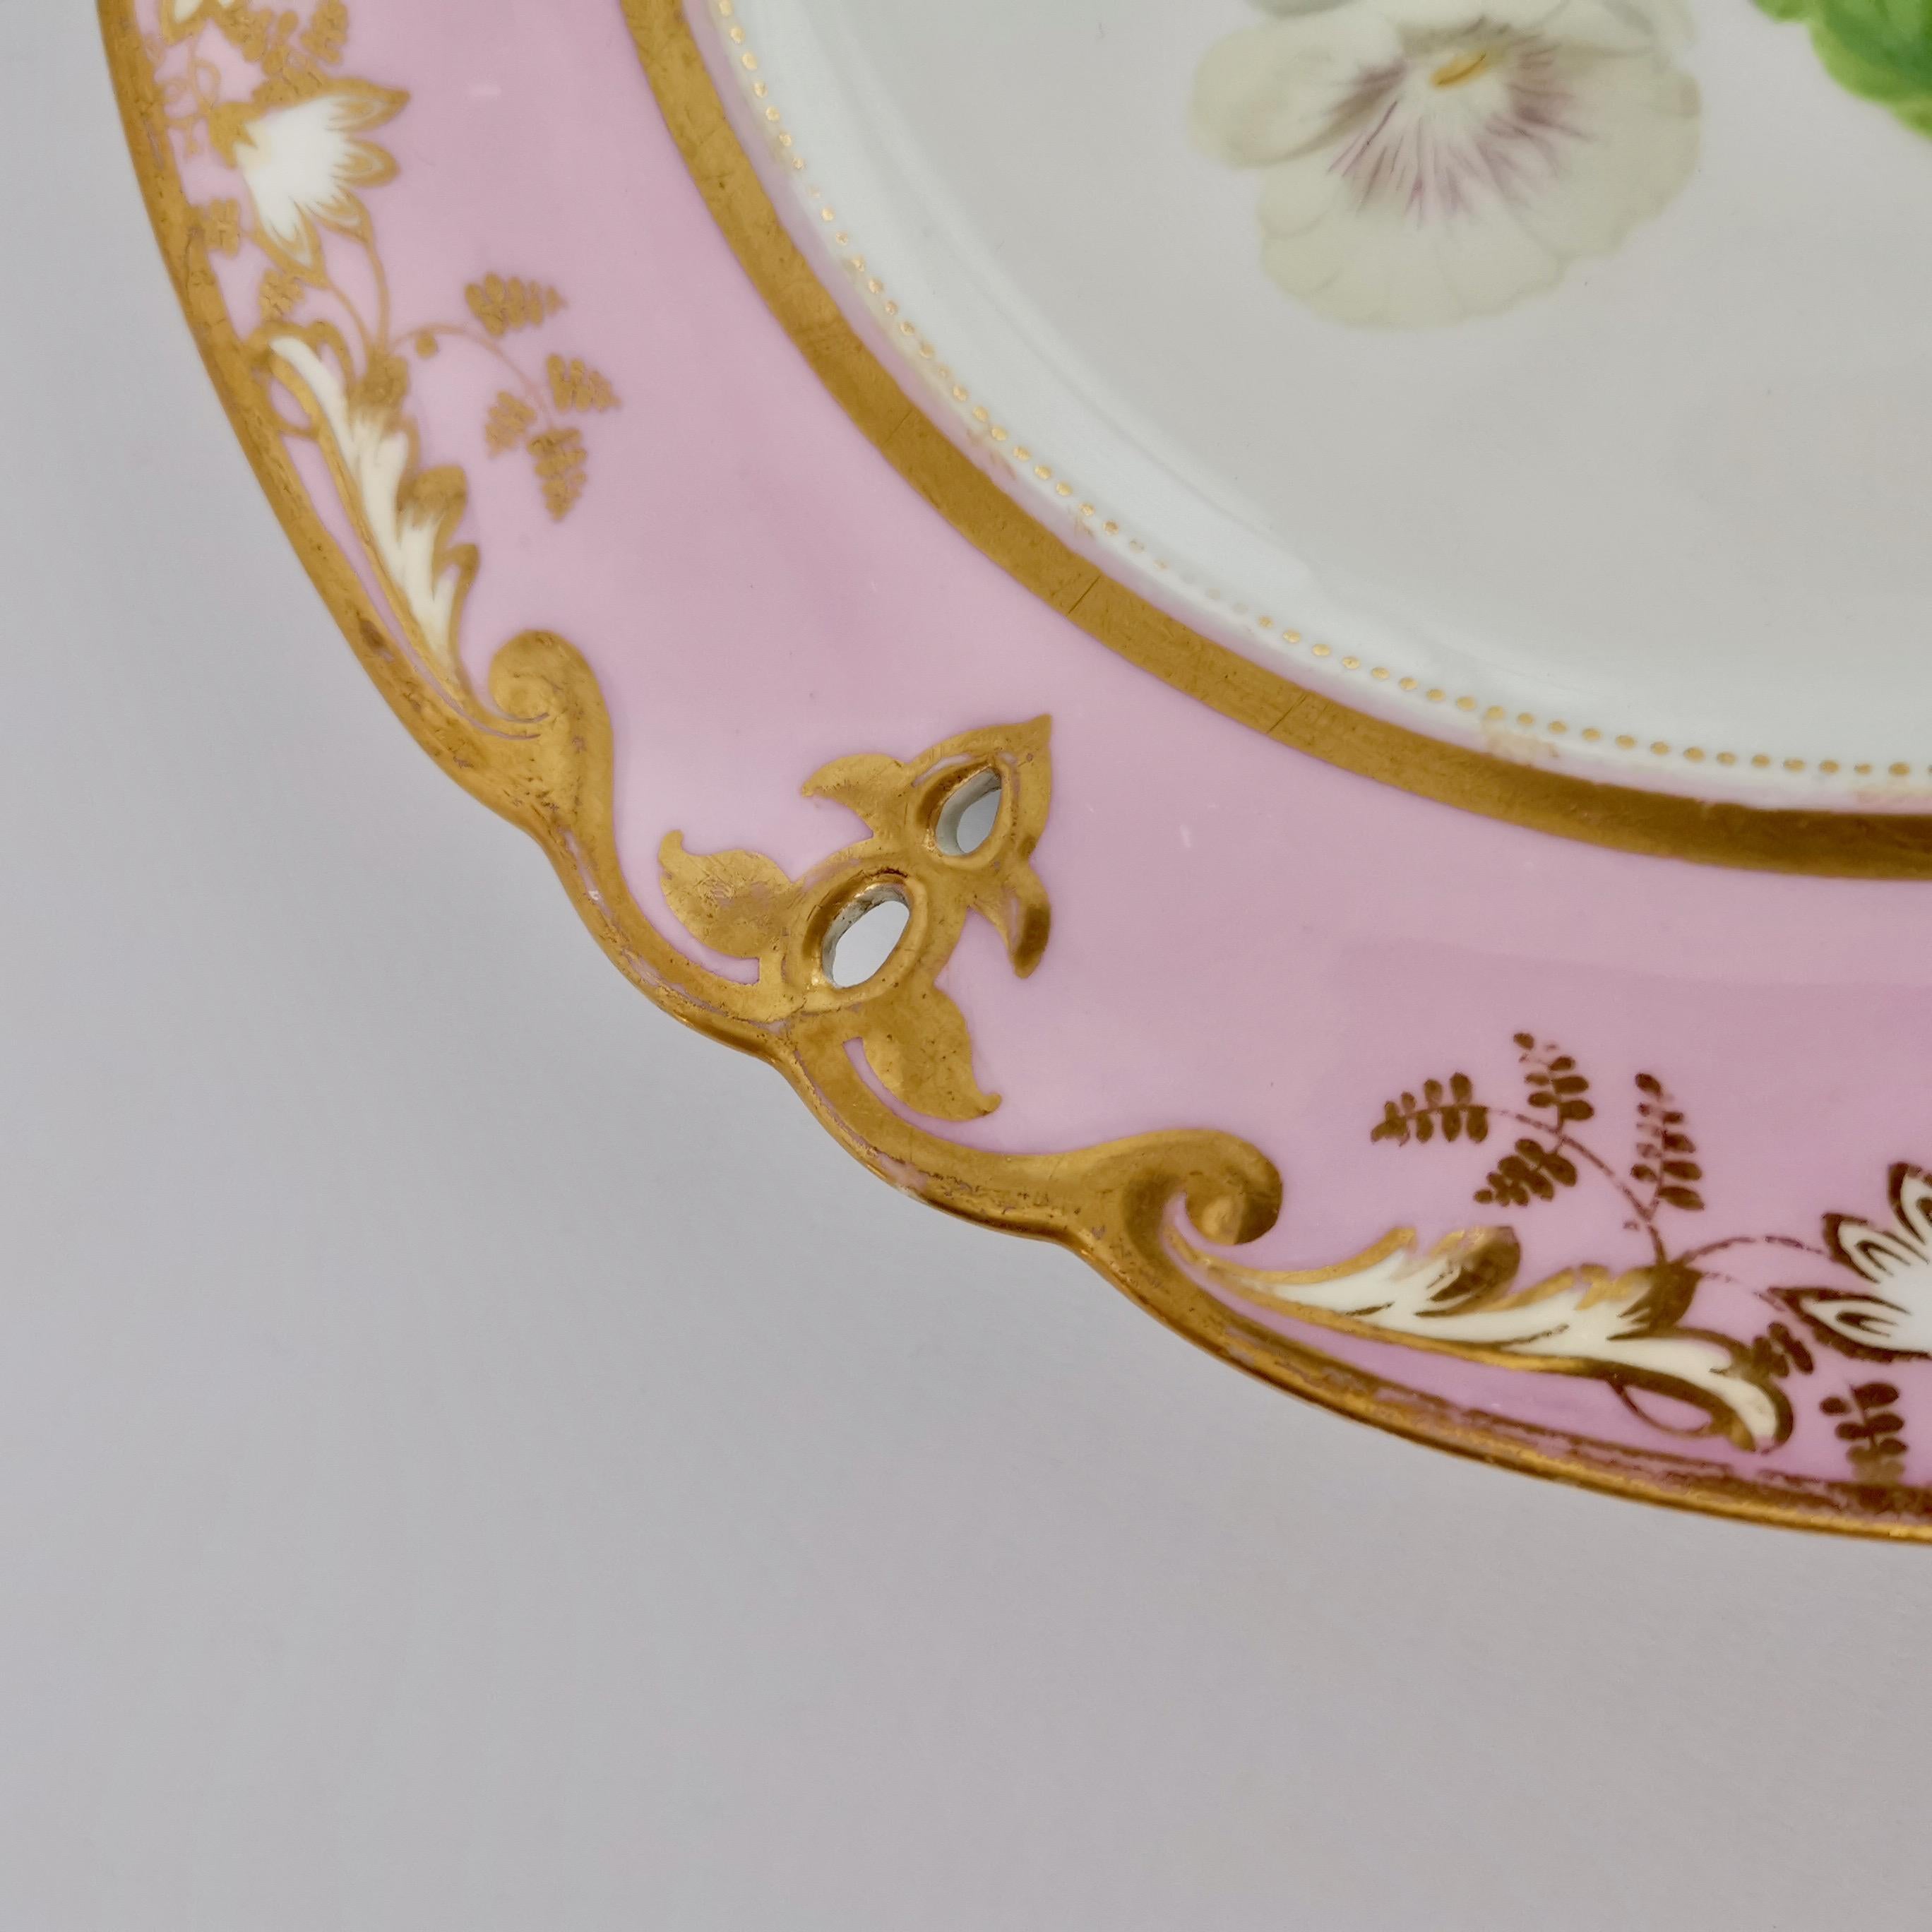 Samuel Alcock Porcelain Plate, Pink with White Achimenes, circa 1852 '1' 7